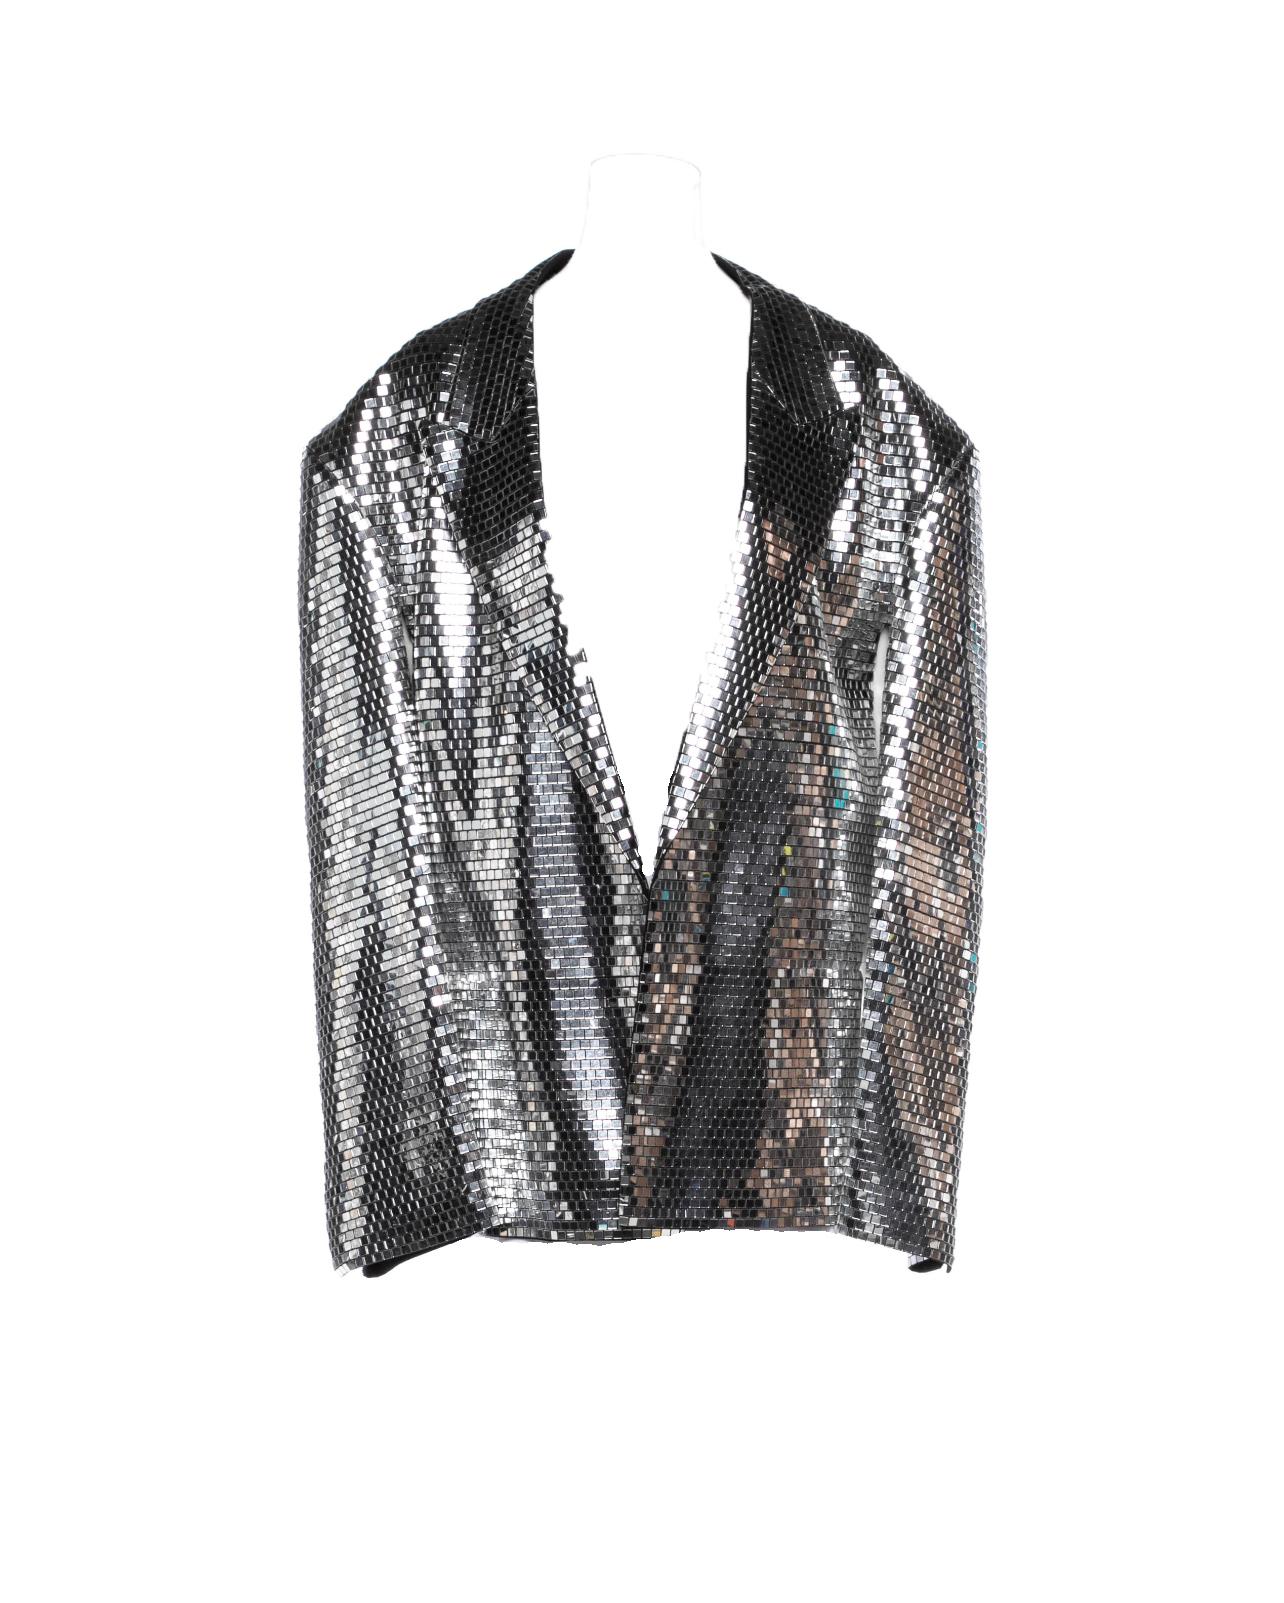 2009 Martin Margiela Mirrored Disco Jacket 
Look #35 from Spring 2009 collection by Martin Margiela
Can be worn as cape or jacket
Condition: Very good, no missing mirrors or wear
42